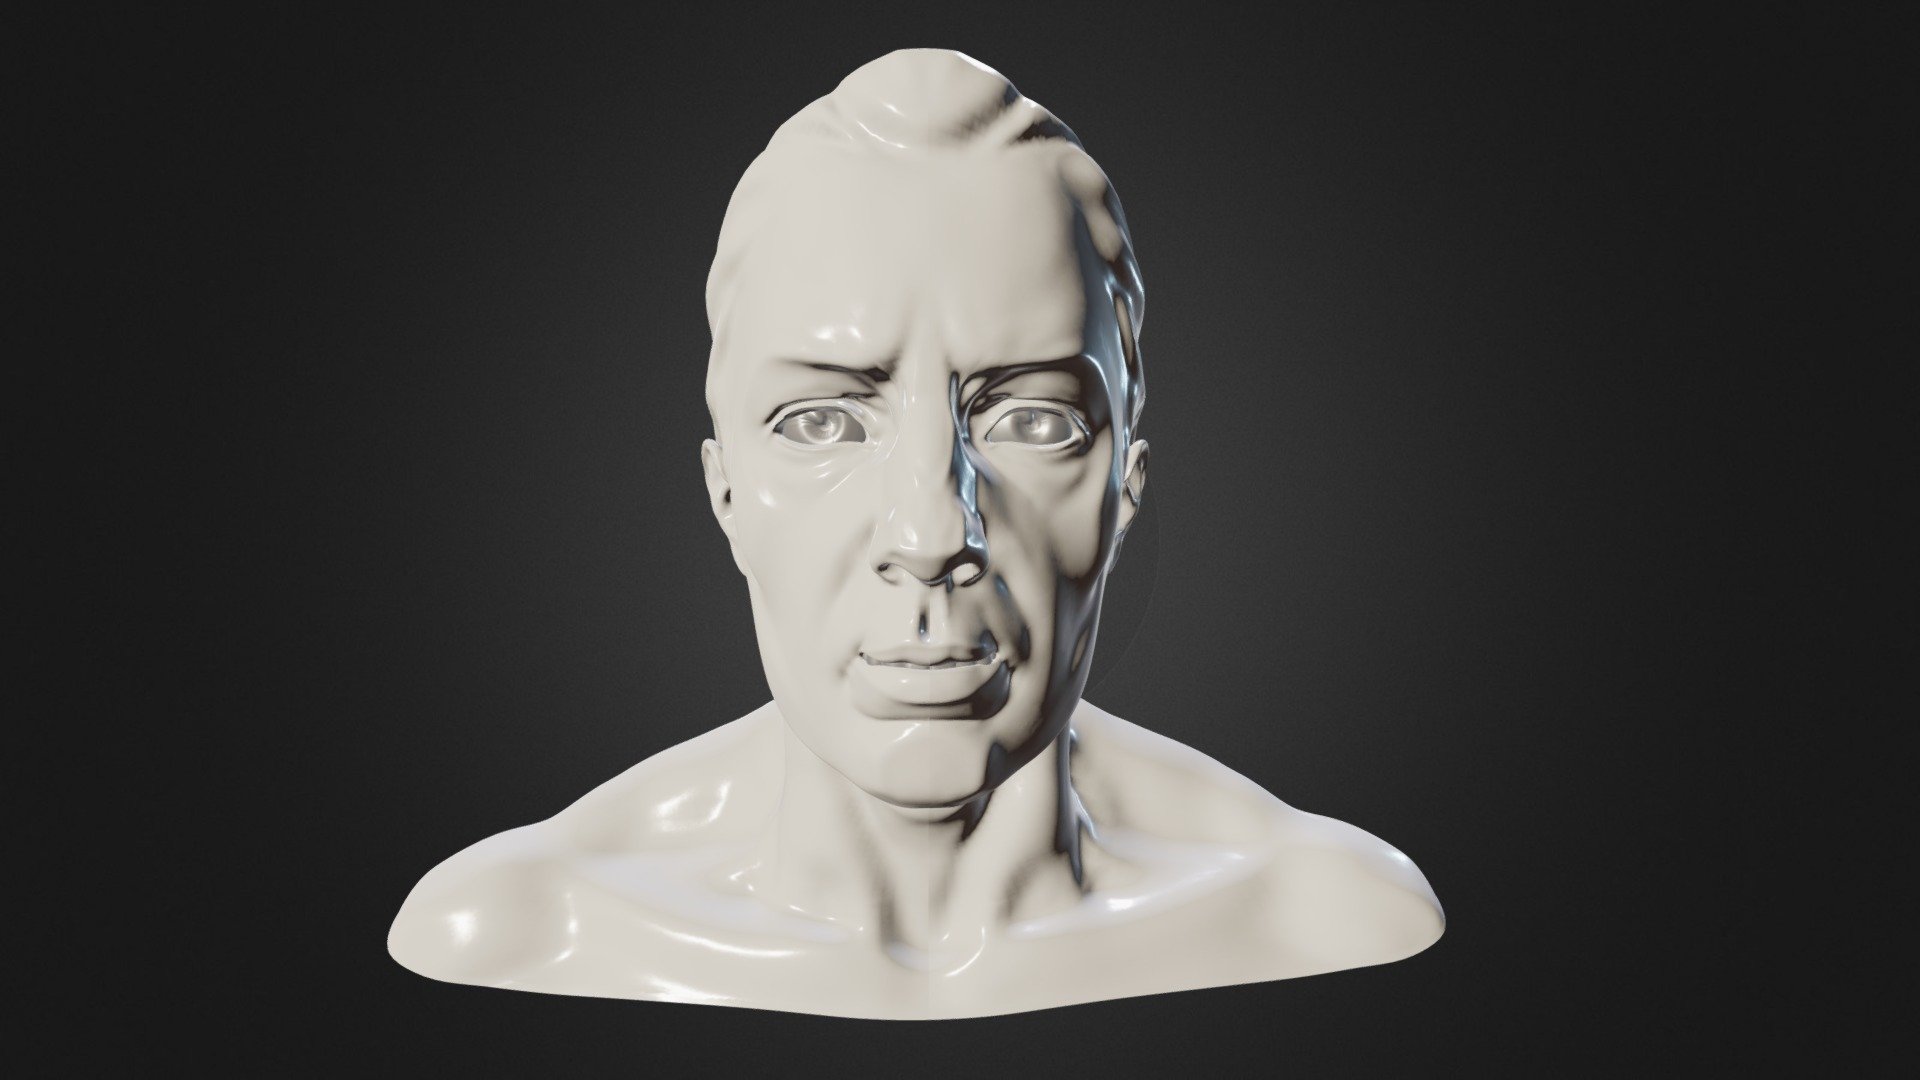 Uploading to sketchfab from zbrush how to unbake a zbrush file